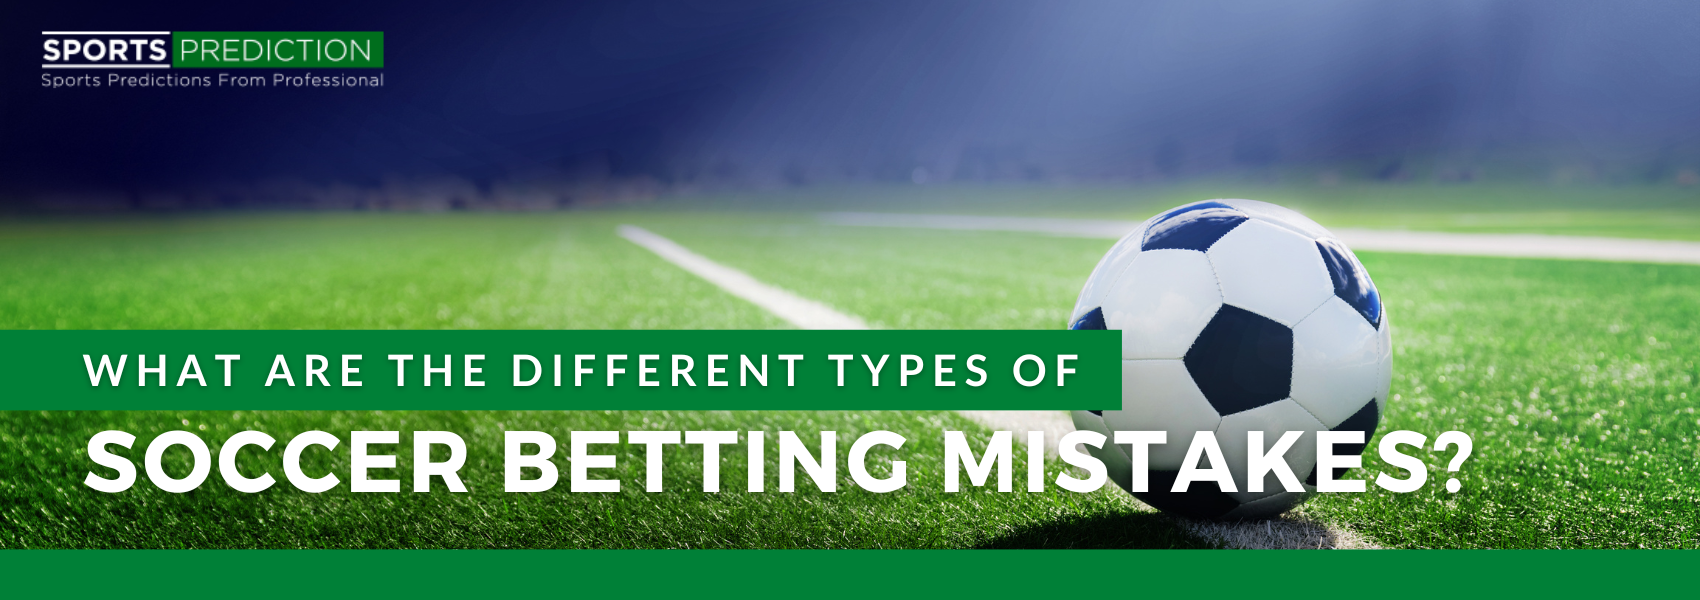 What Are The Different Types Of Soccer Betting Mistakes?